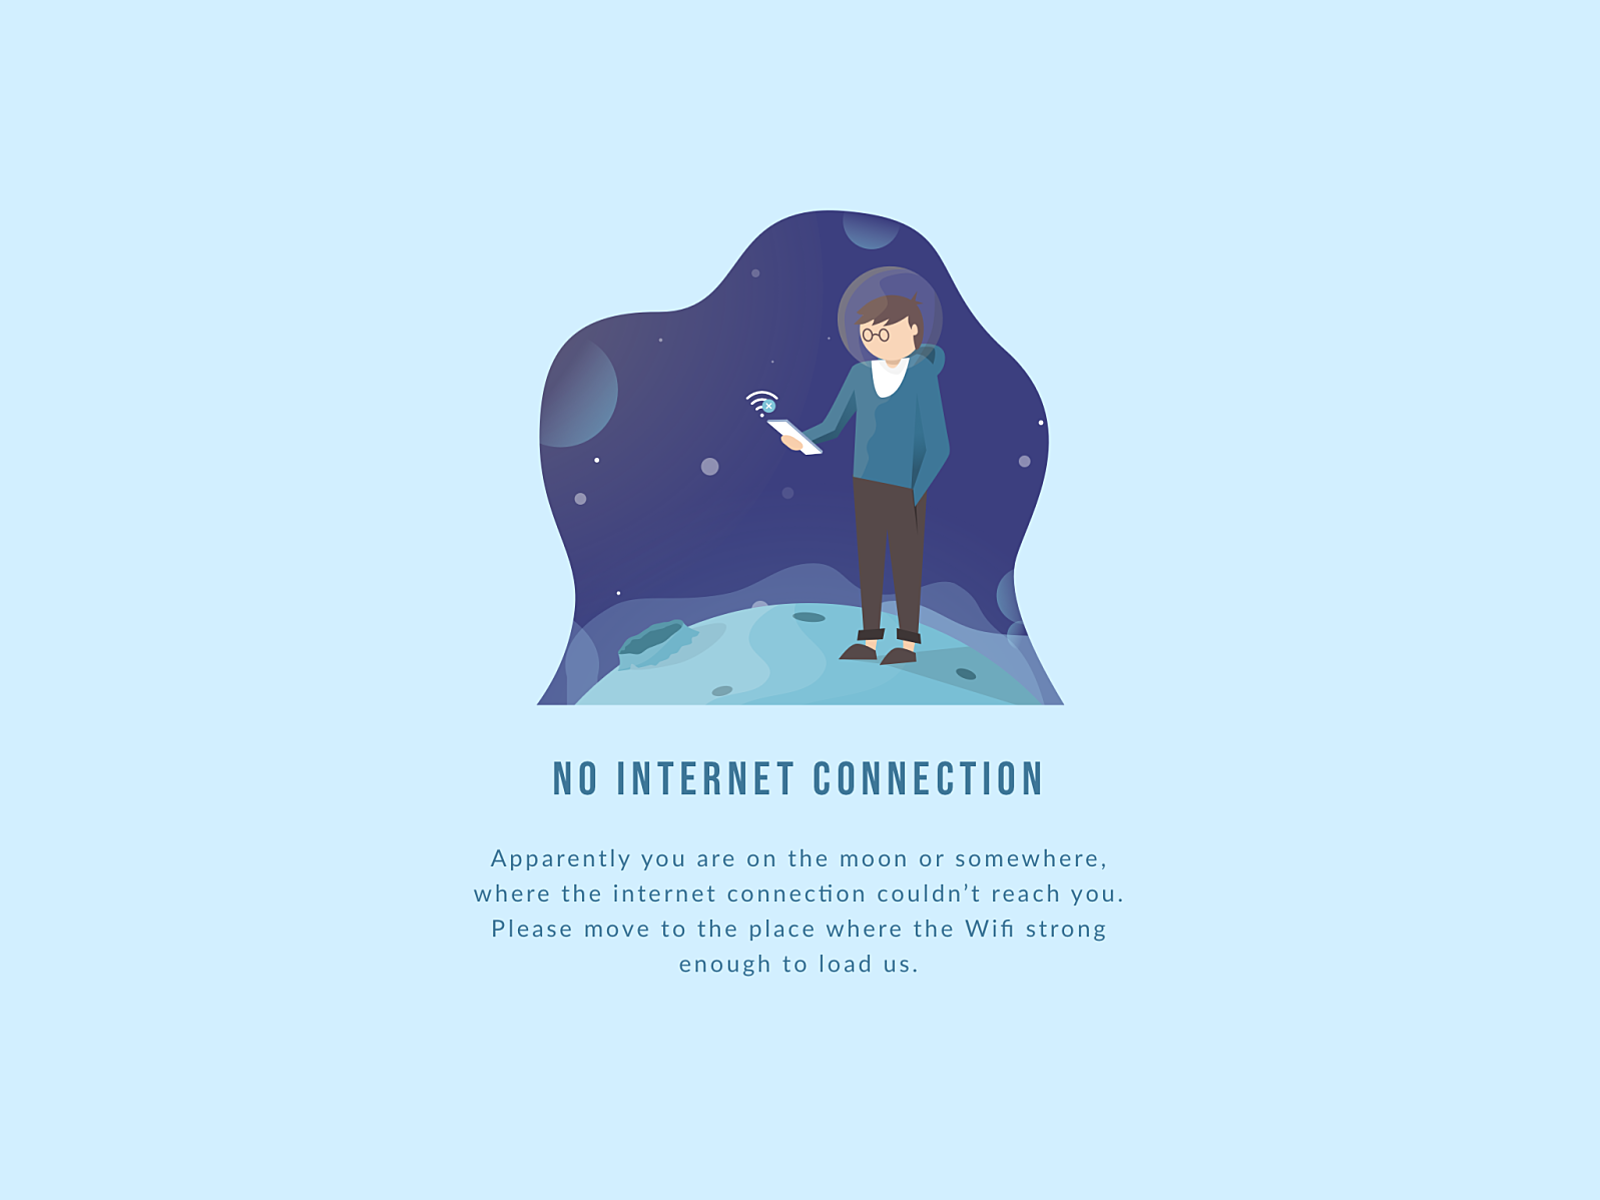 No Internet connection. No Internet Design. No Internet connection icon. No Internet connection gif. Are you connected to the internet